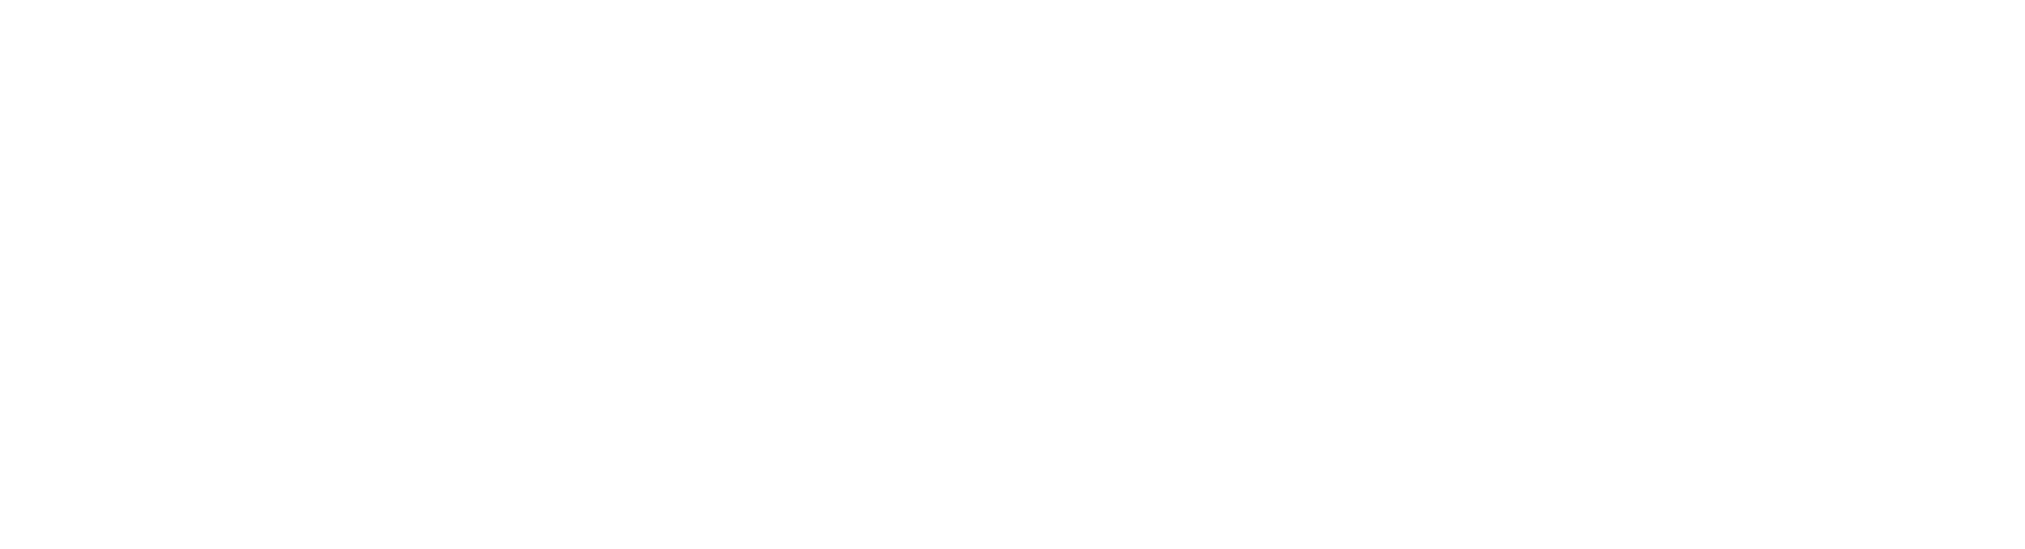 visualisation of dispatch distribution and delivery